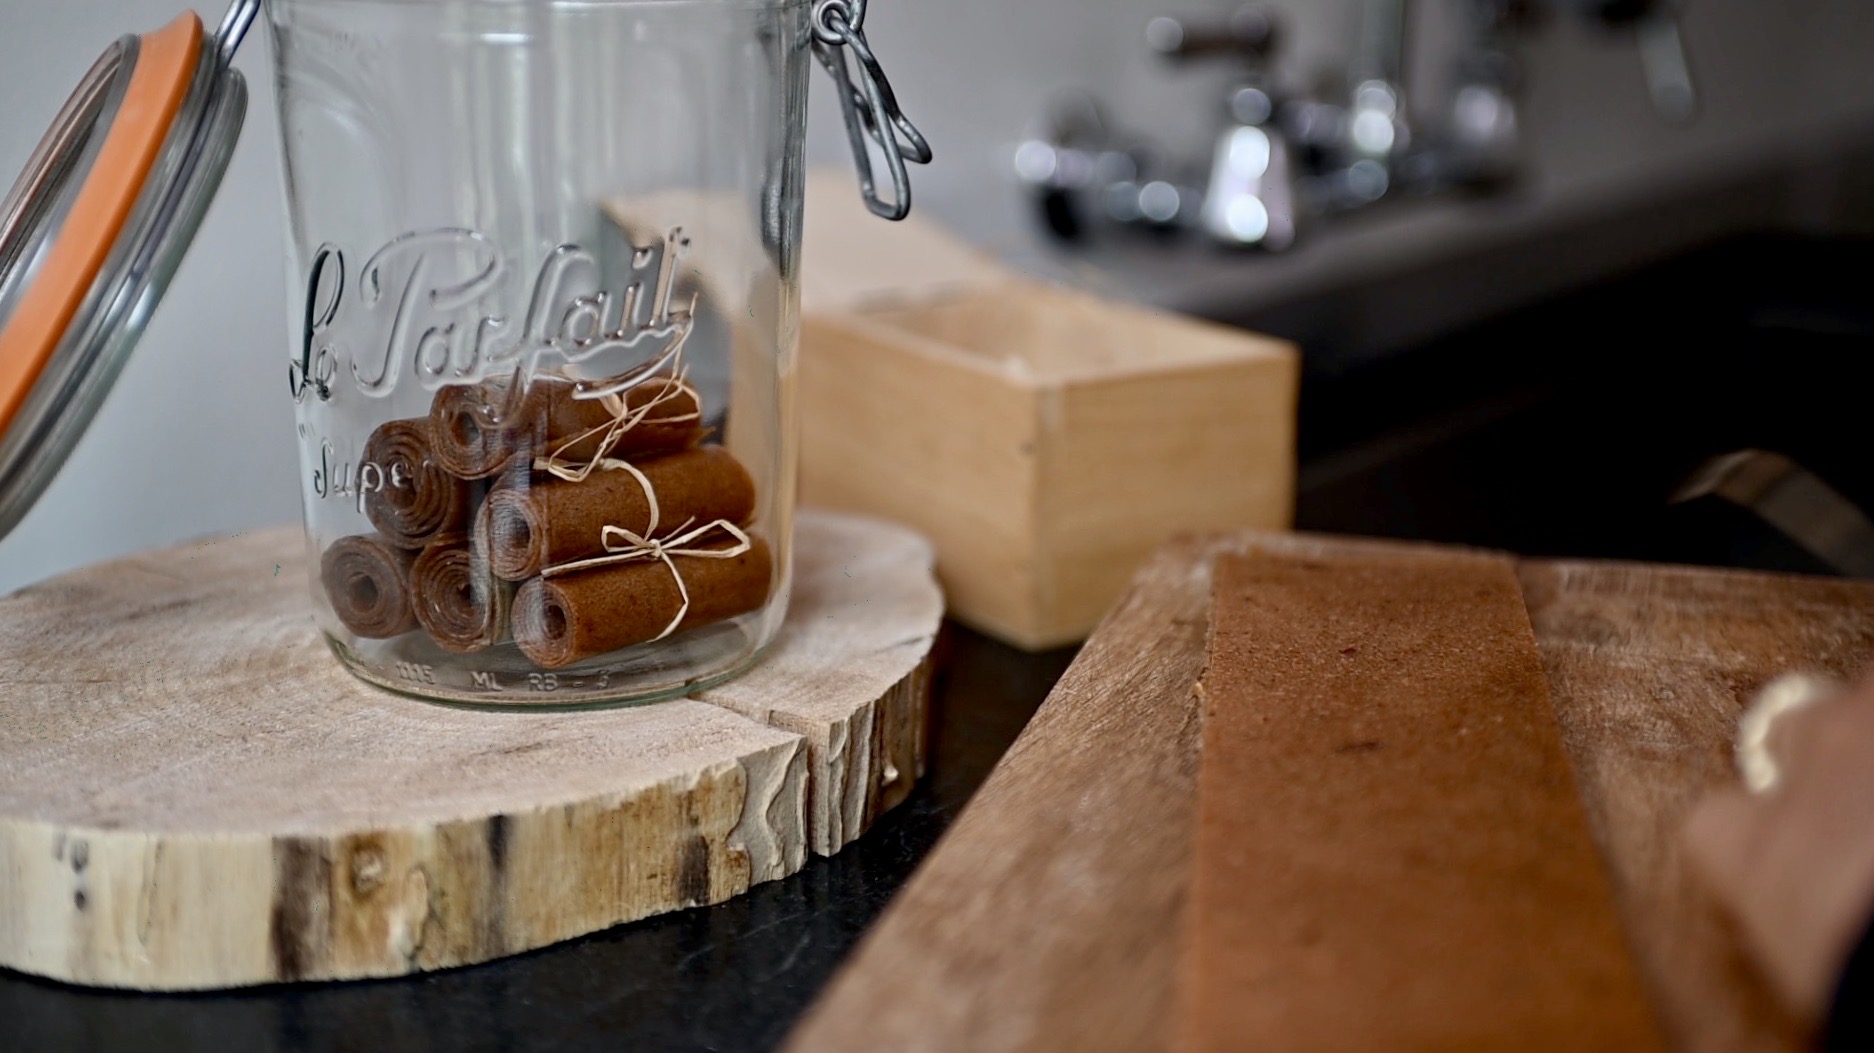 Apple Leather (Apple roll-ups) in a glass jar